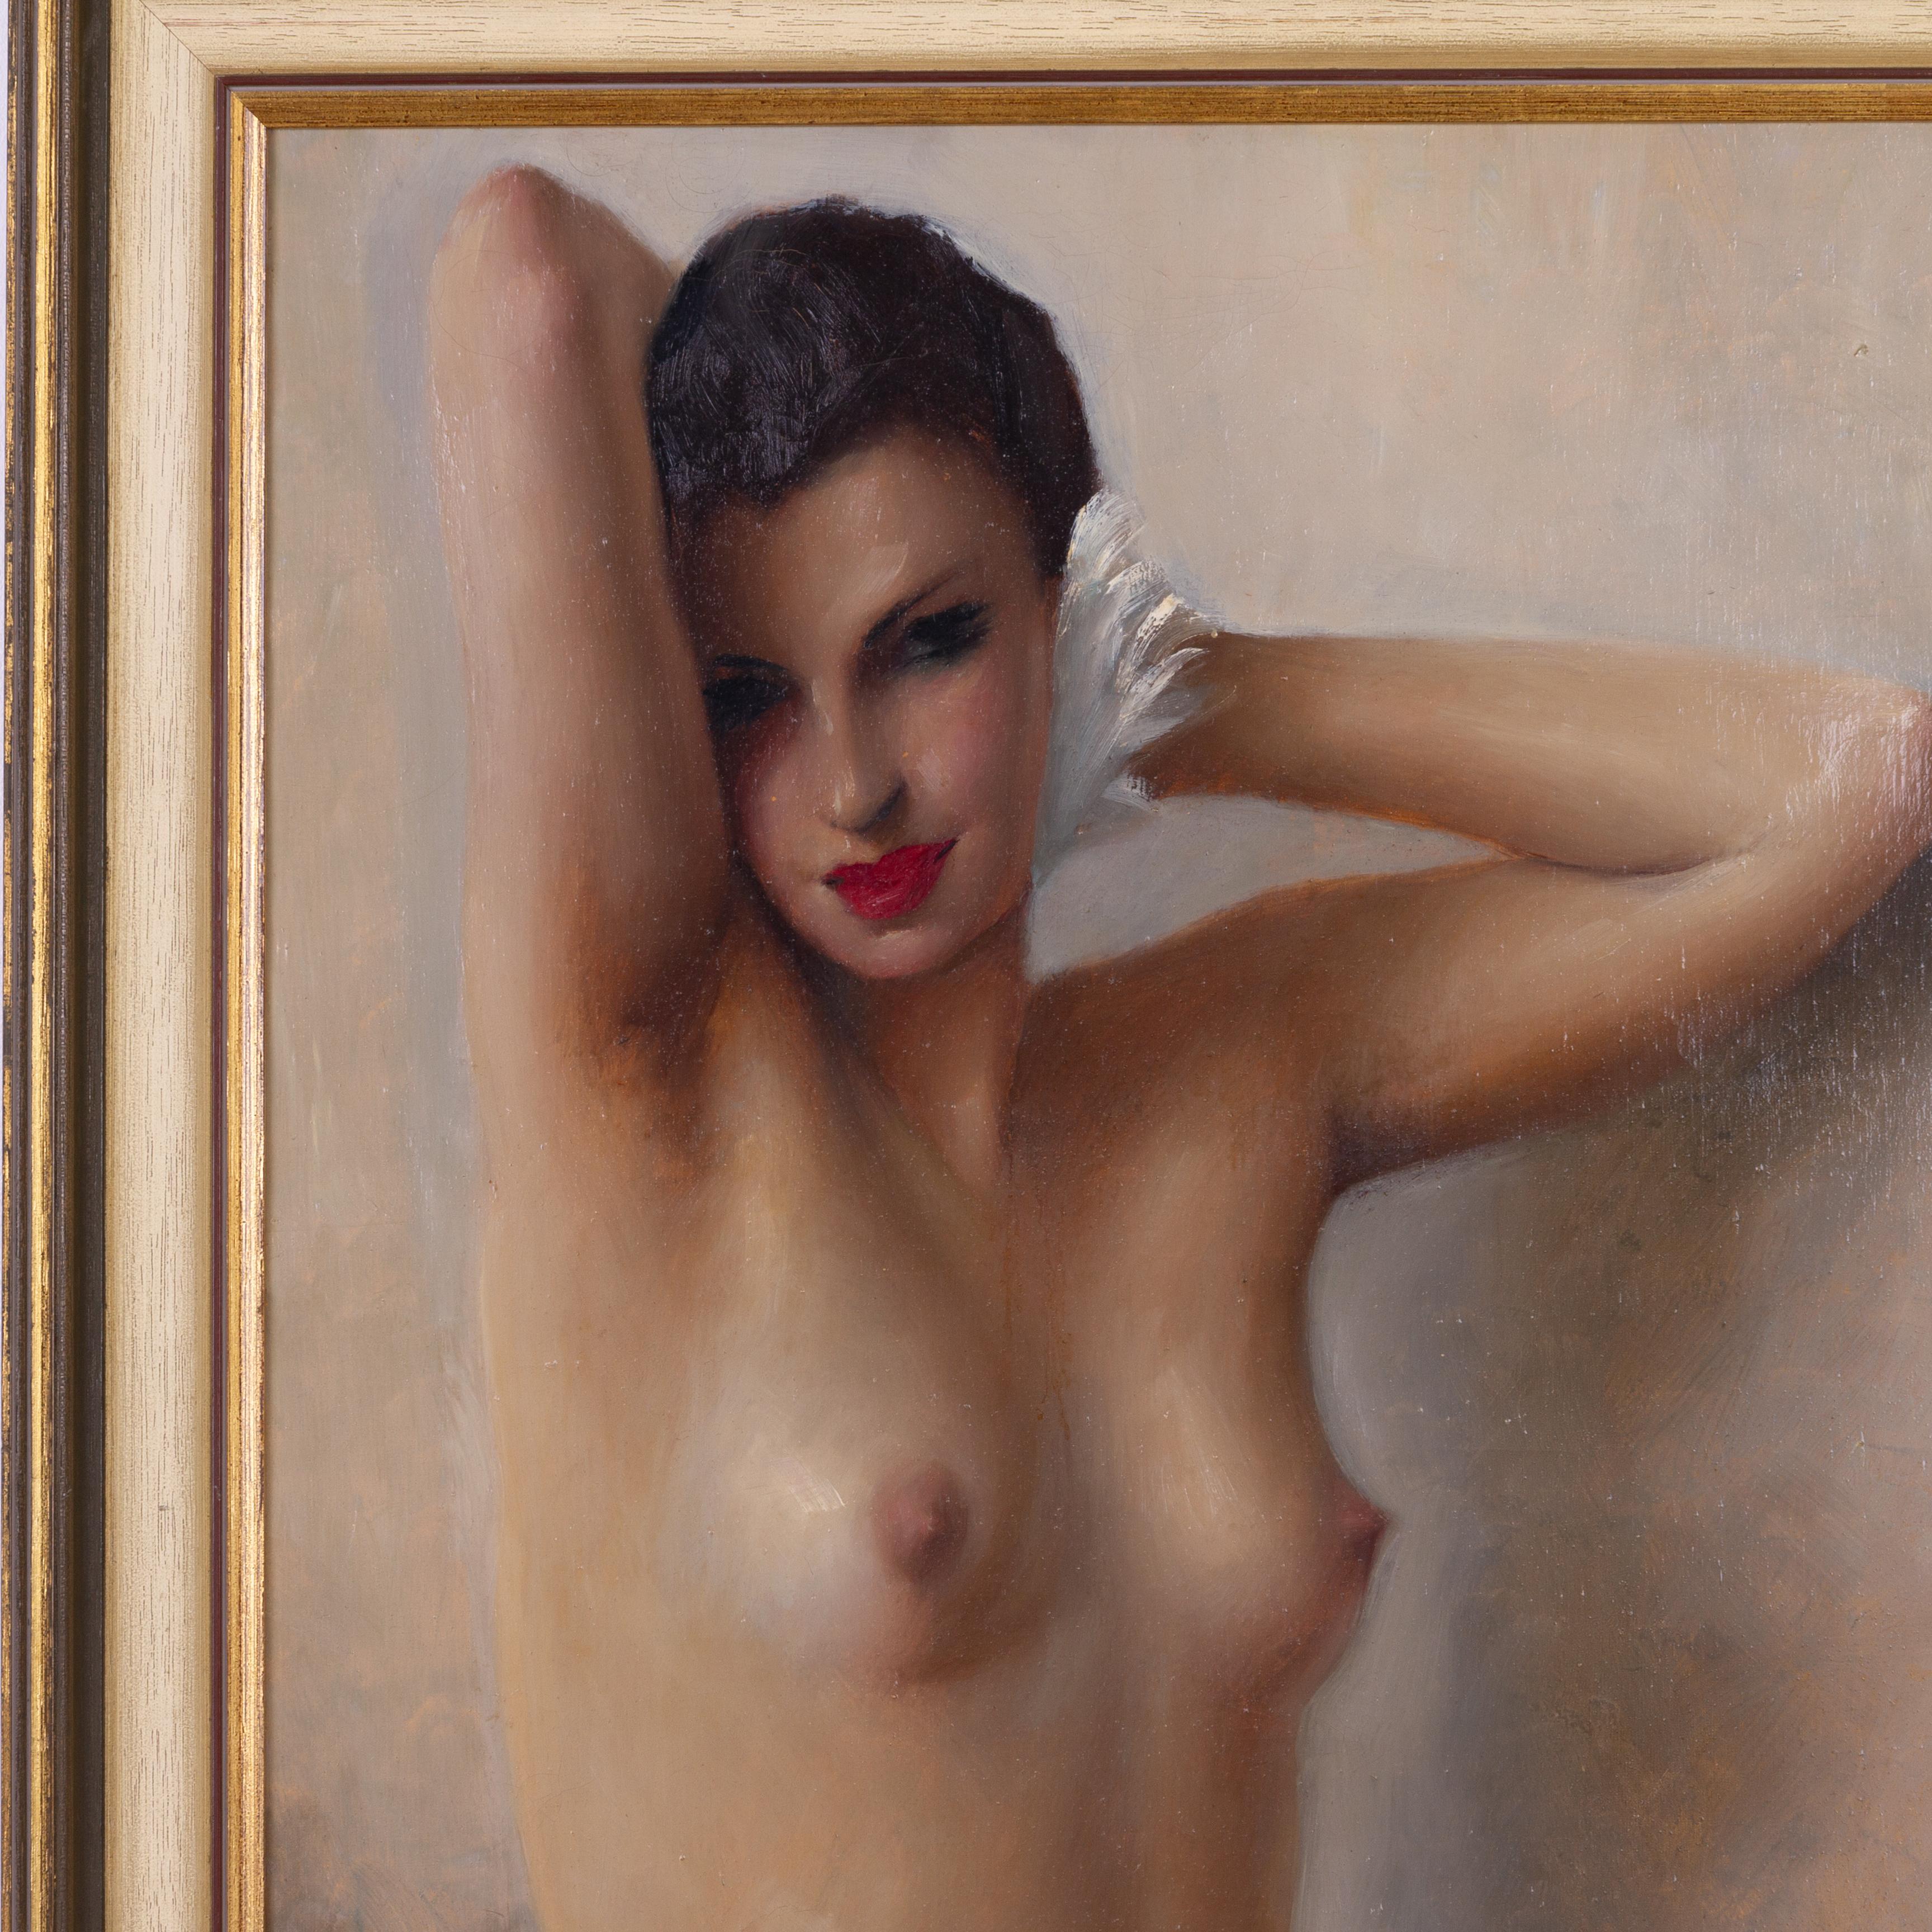 In good condition
From a private collection
Free international shipping
Signed Nude Portrait Oil Painting  
